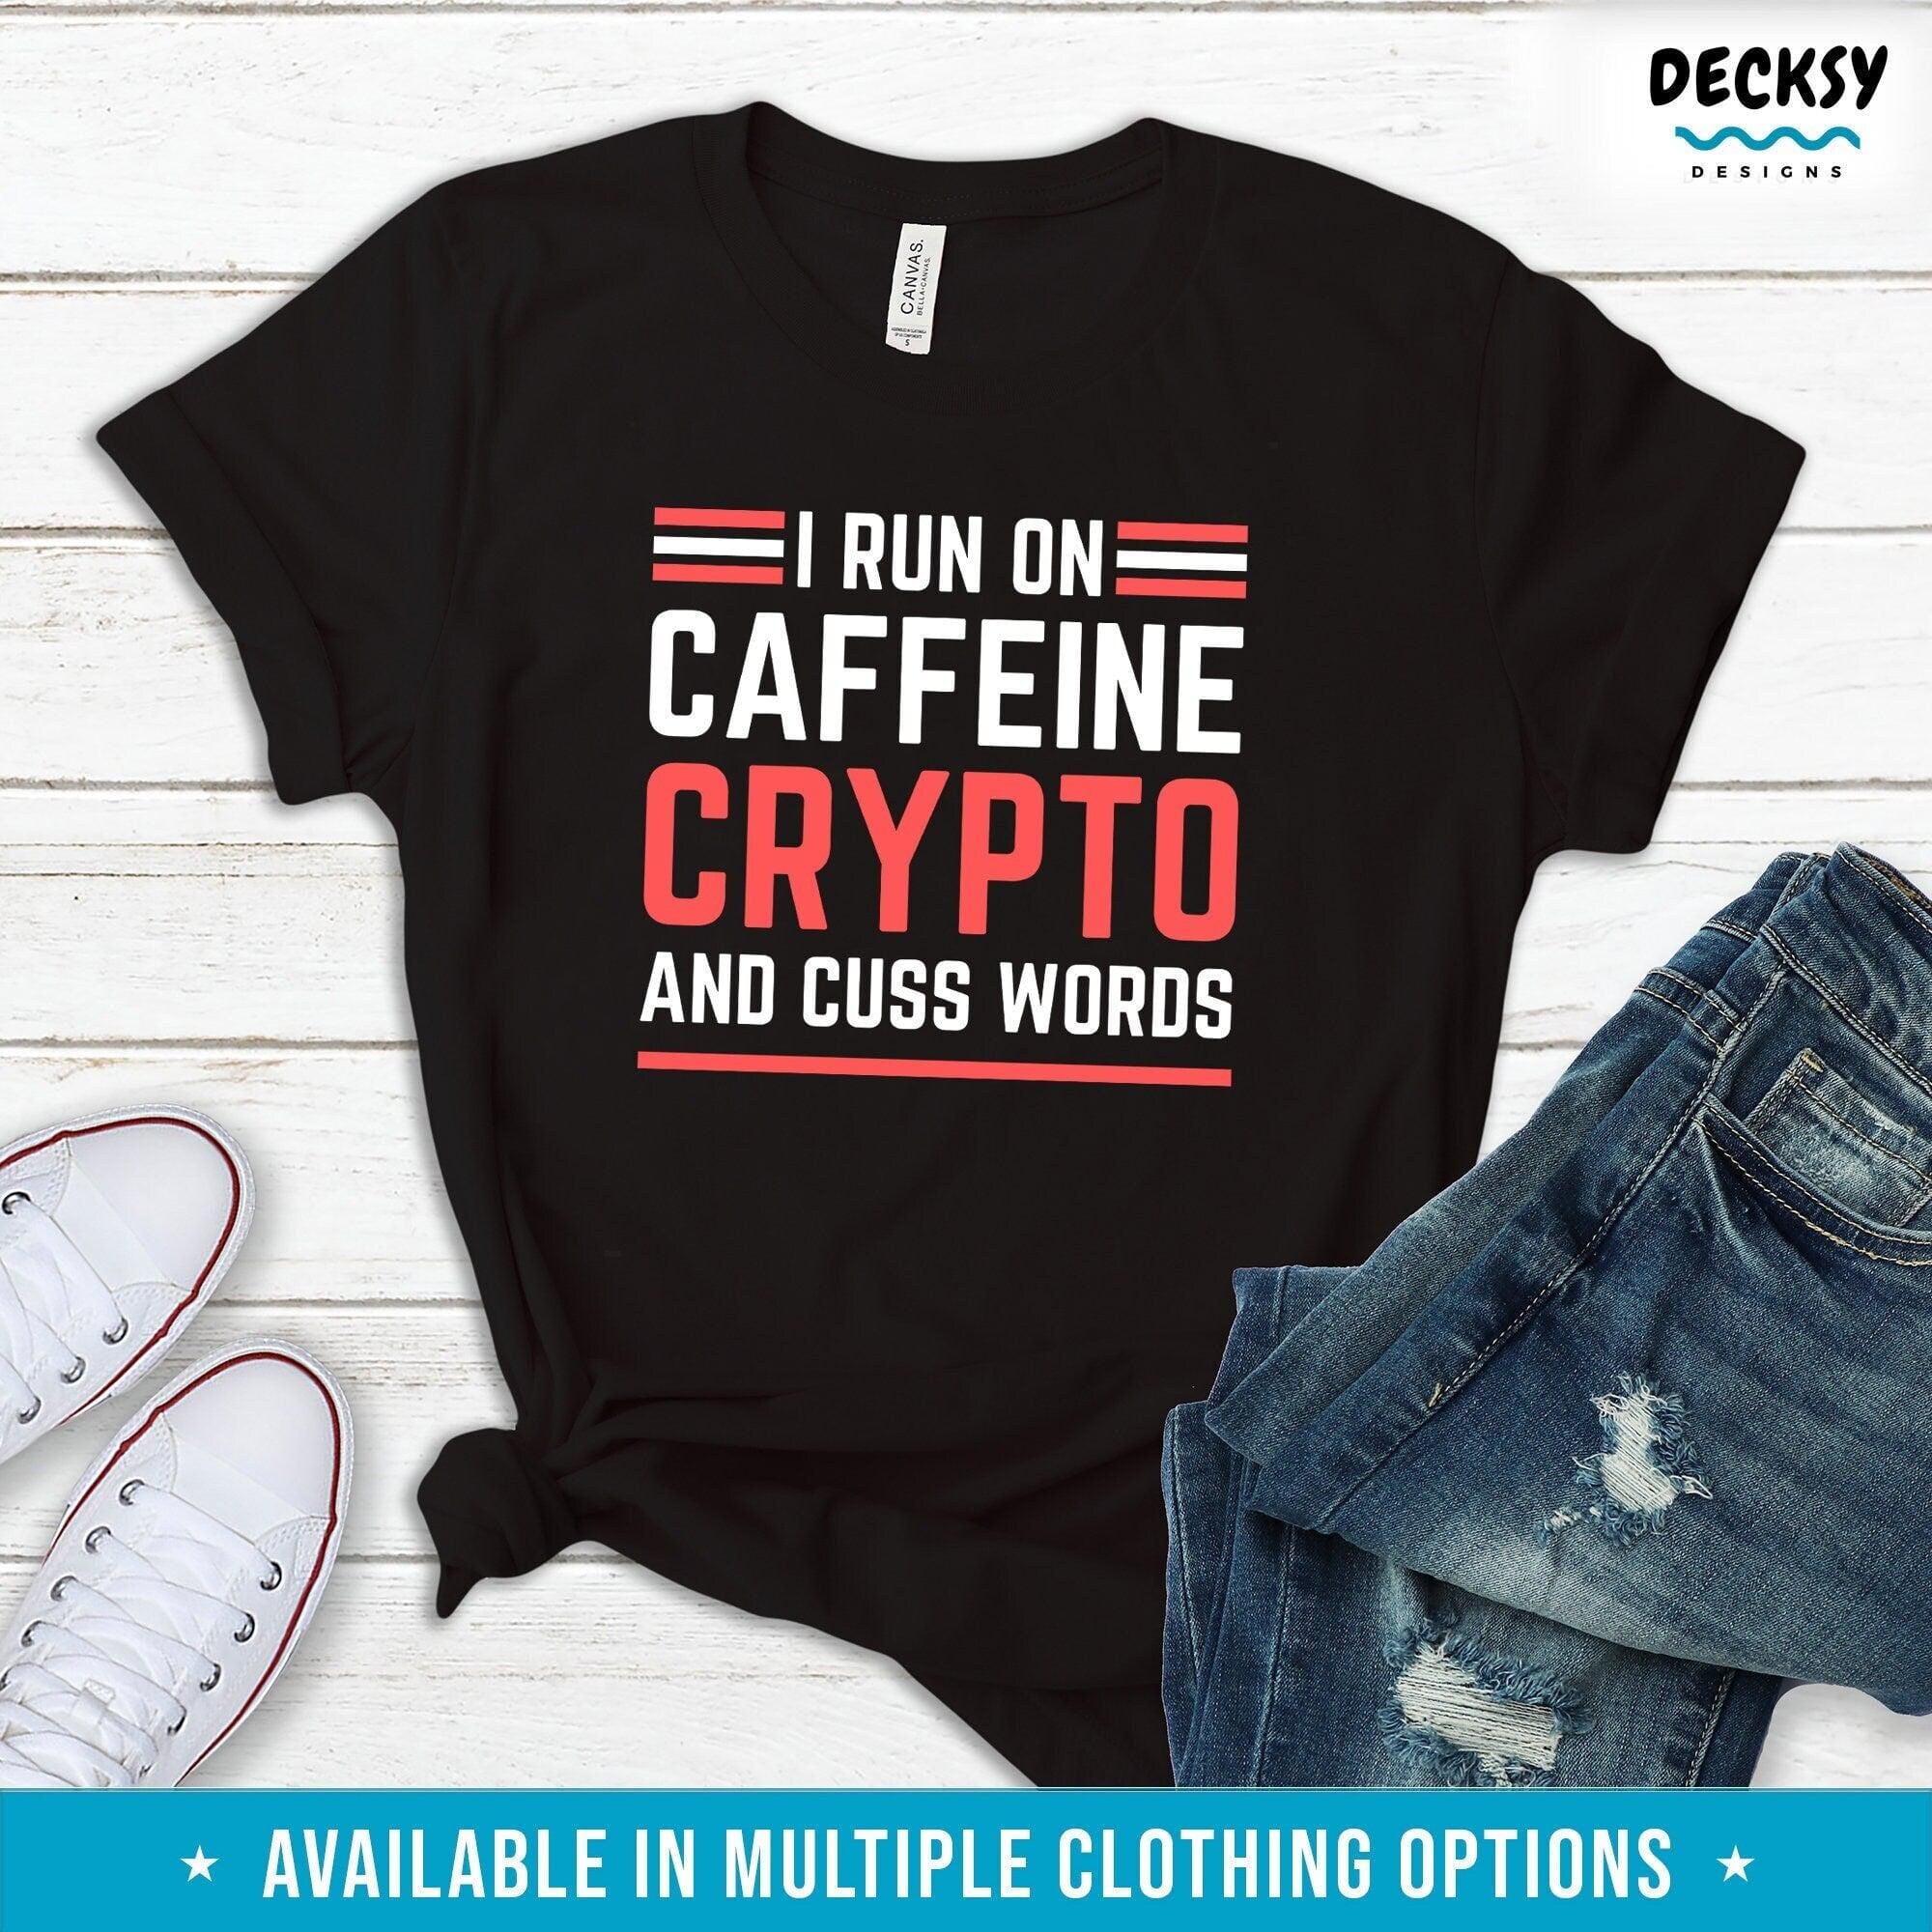 Crypto Shirt, Blockchain and Coffee Lover Gift-Clothing:Gender-Neutral Adult Clothing:Tops & Tees:T-shirts:Graphic Tees-DecksyDesigns